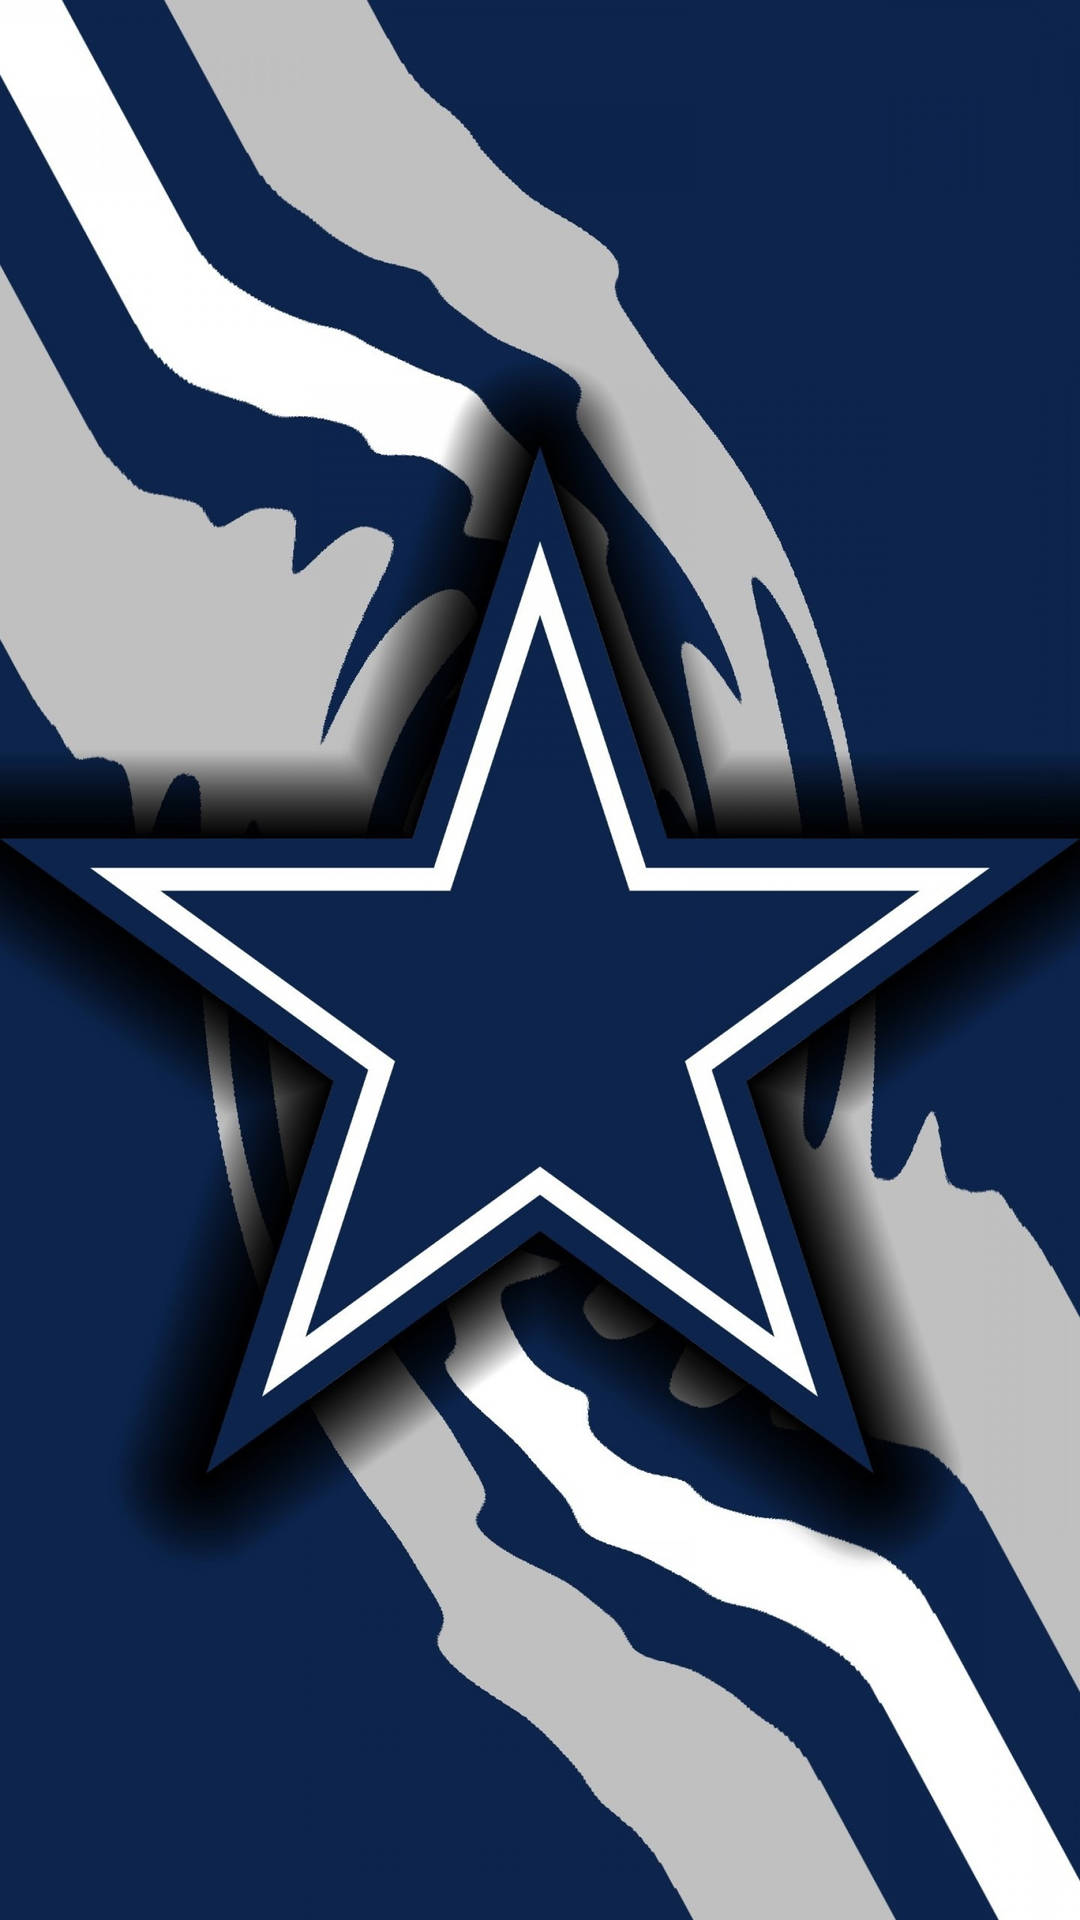 Dallas Cowboys Logo With Swirls For Phone Background